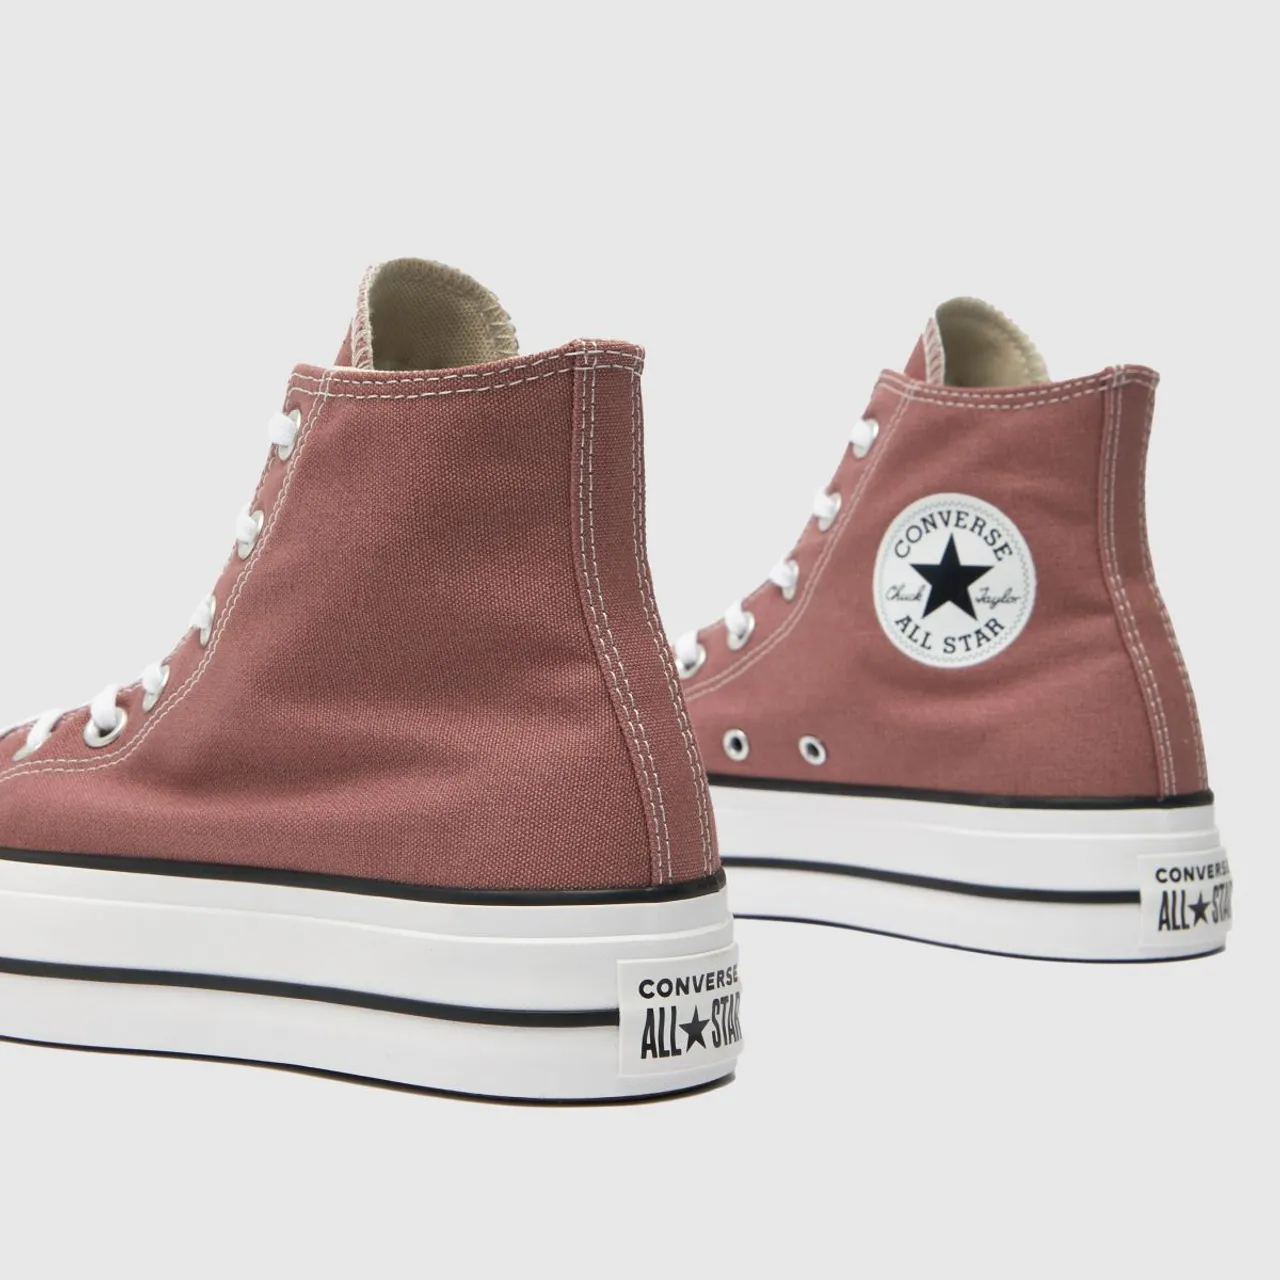 Converse All Star Lift Hi Trainers In Burgundy